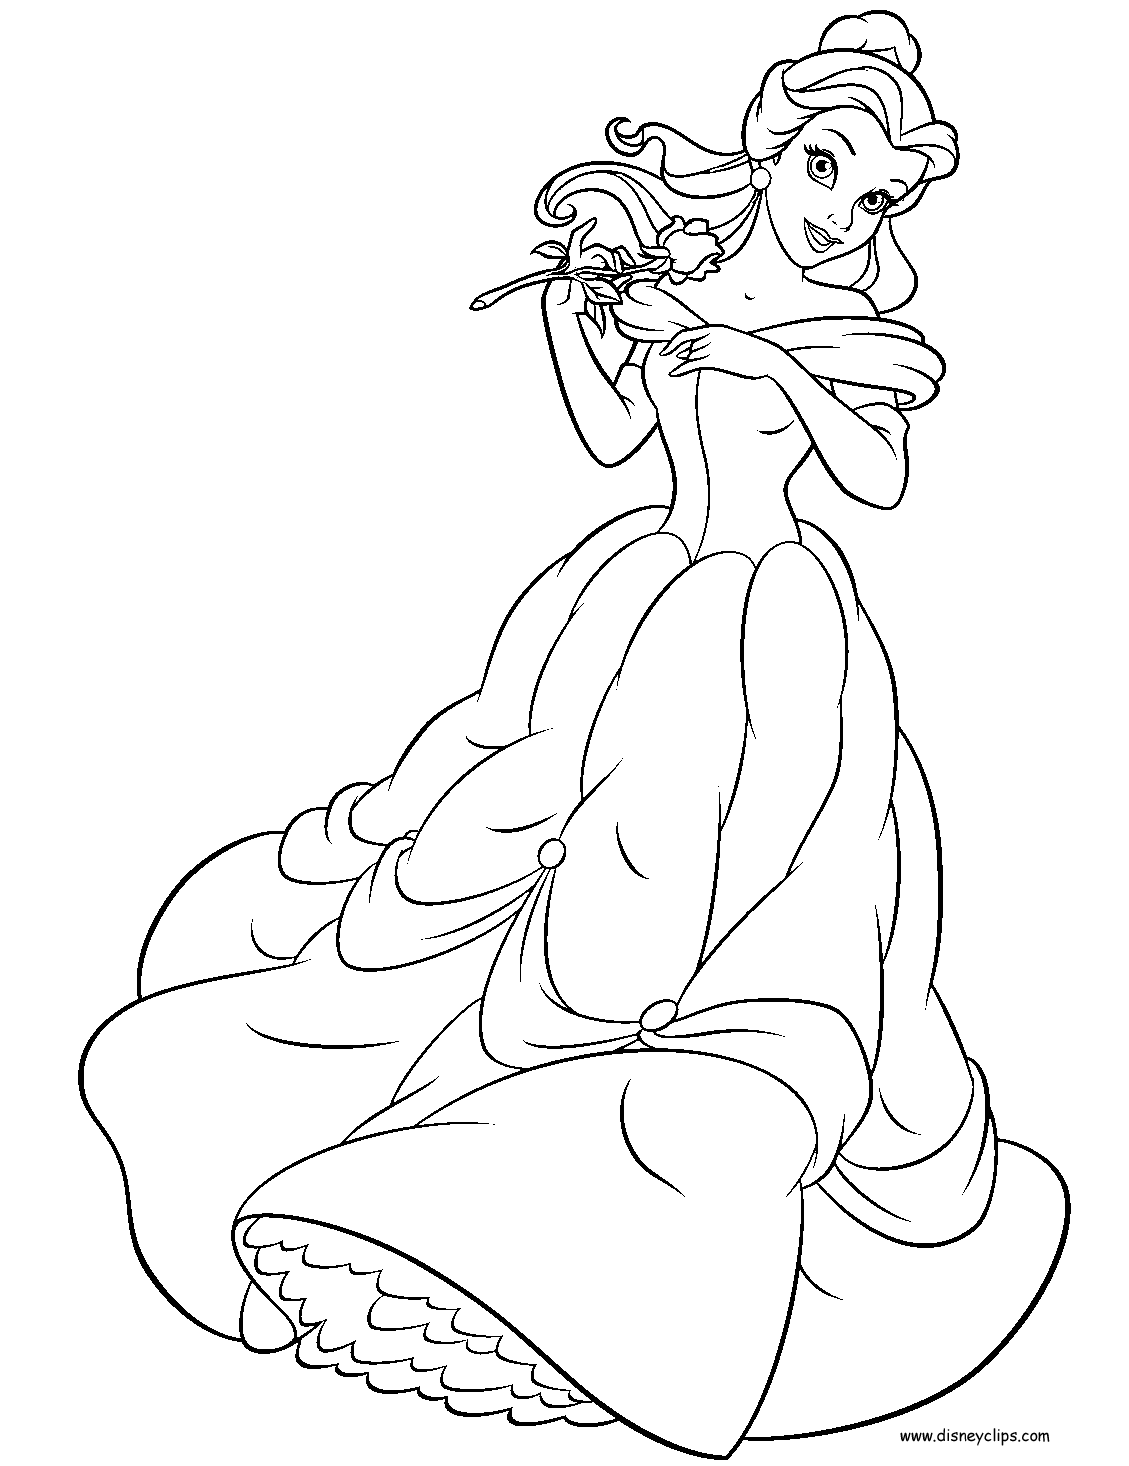 Princess belle coloring pages to download and print for free